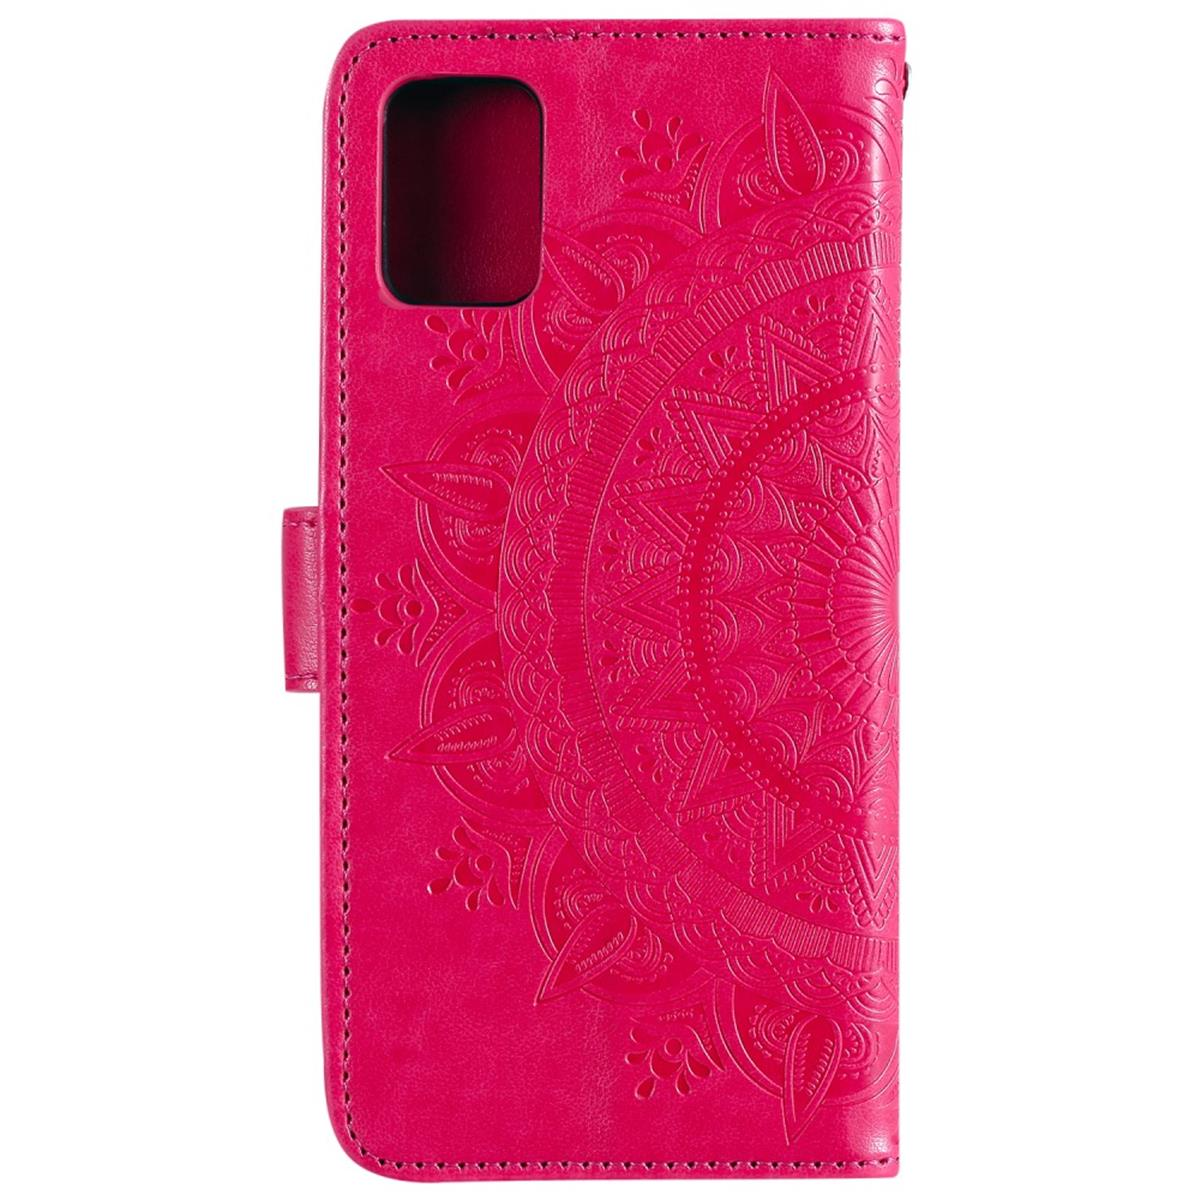 Bookcover, Samsung, Klapphülle Pink Note20, mit Galaxy Muster, COVERKINGZ Mandala